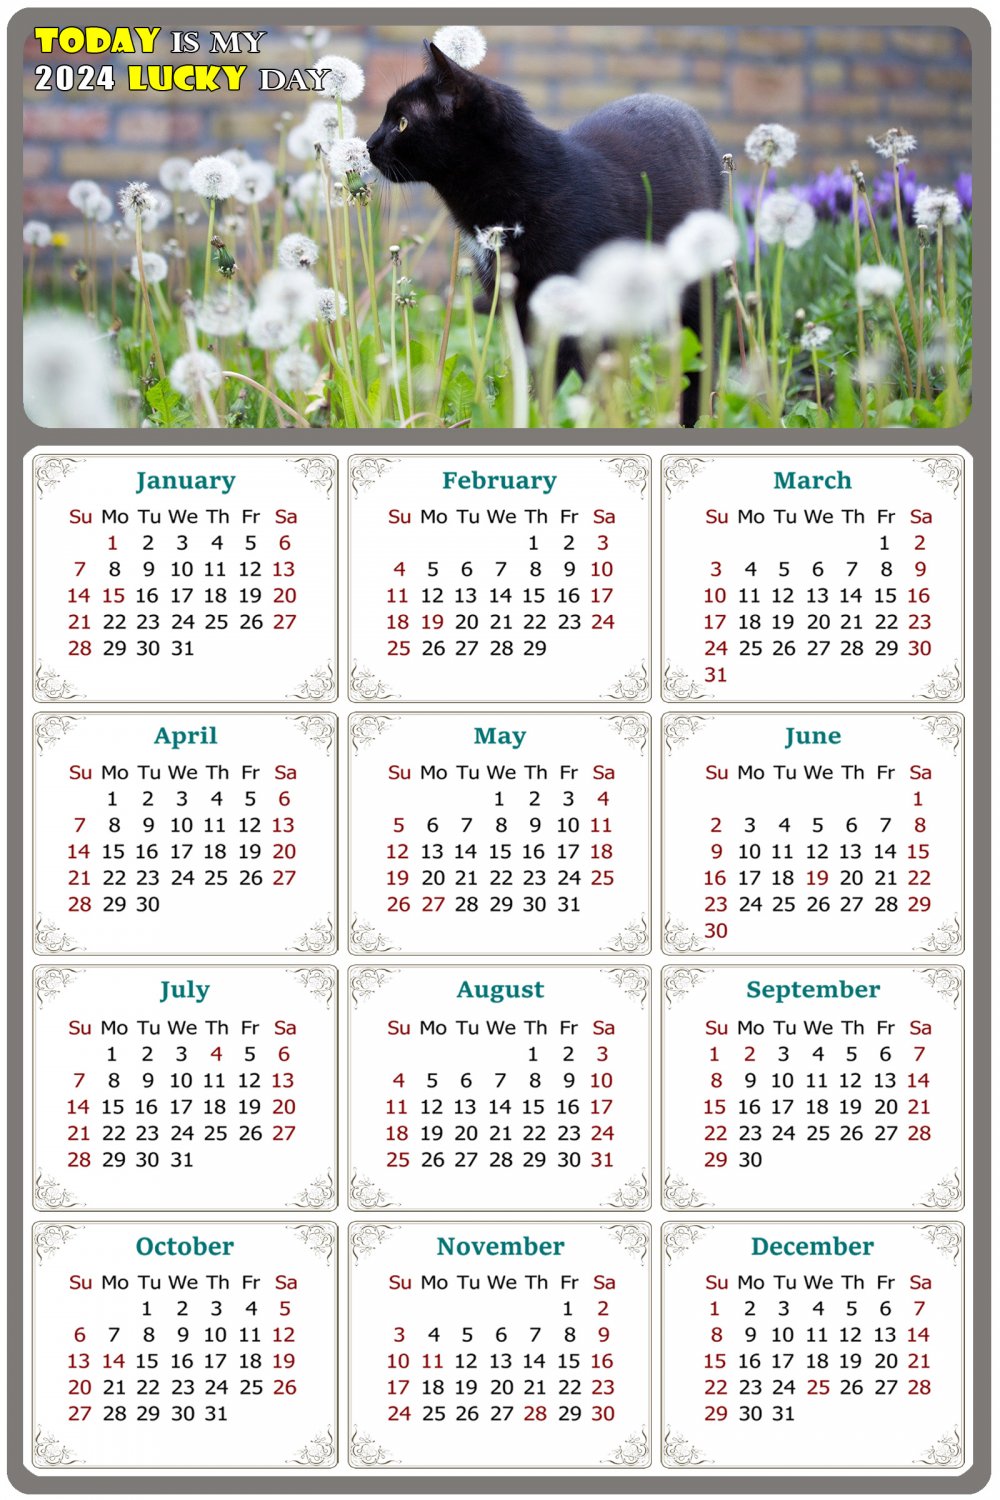 2024 Magnetic Calendar - Calendar Magnets - Today is My Lucky Day - Cat Themed 05 (7 x 10.5)